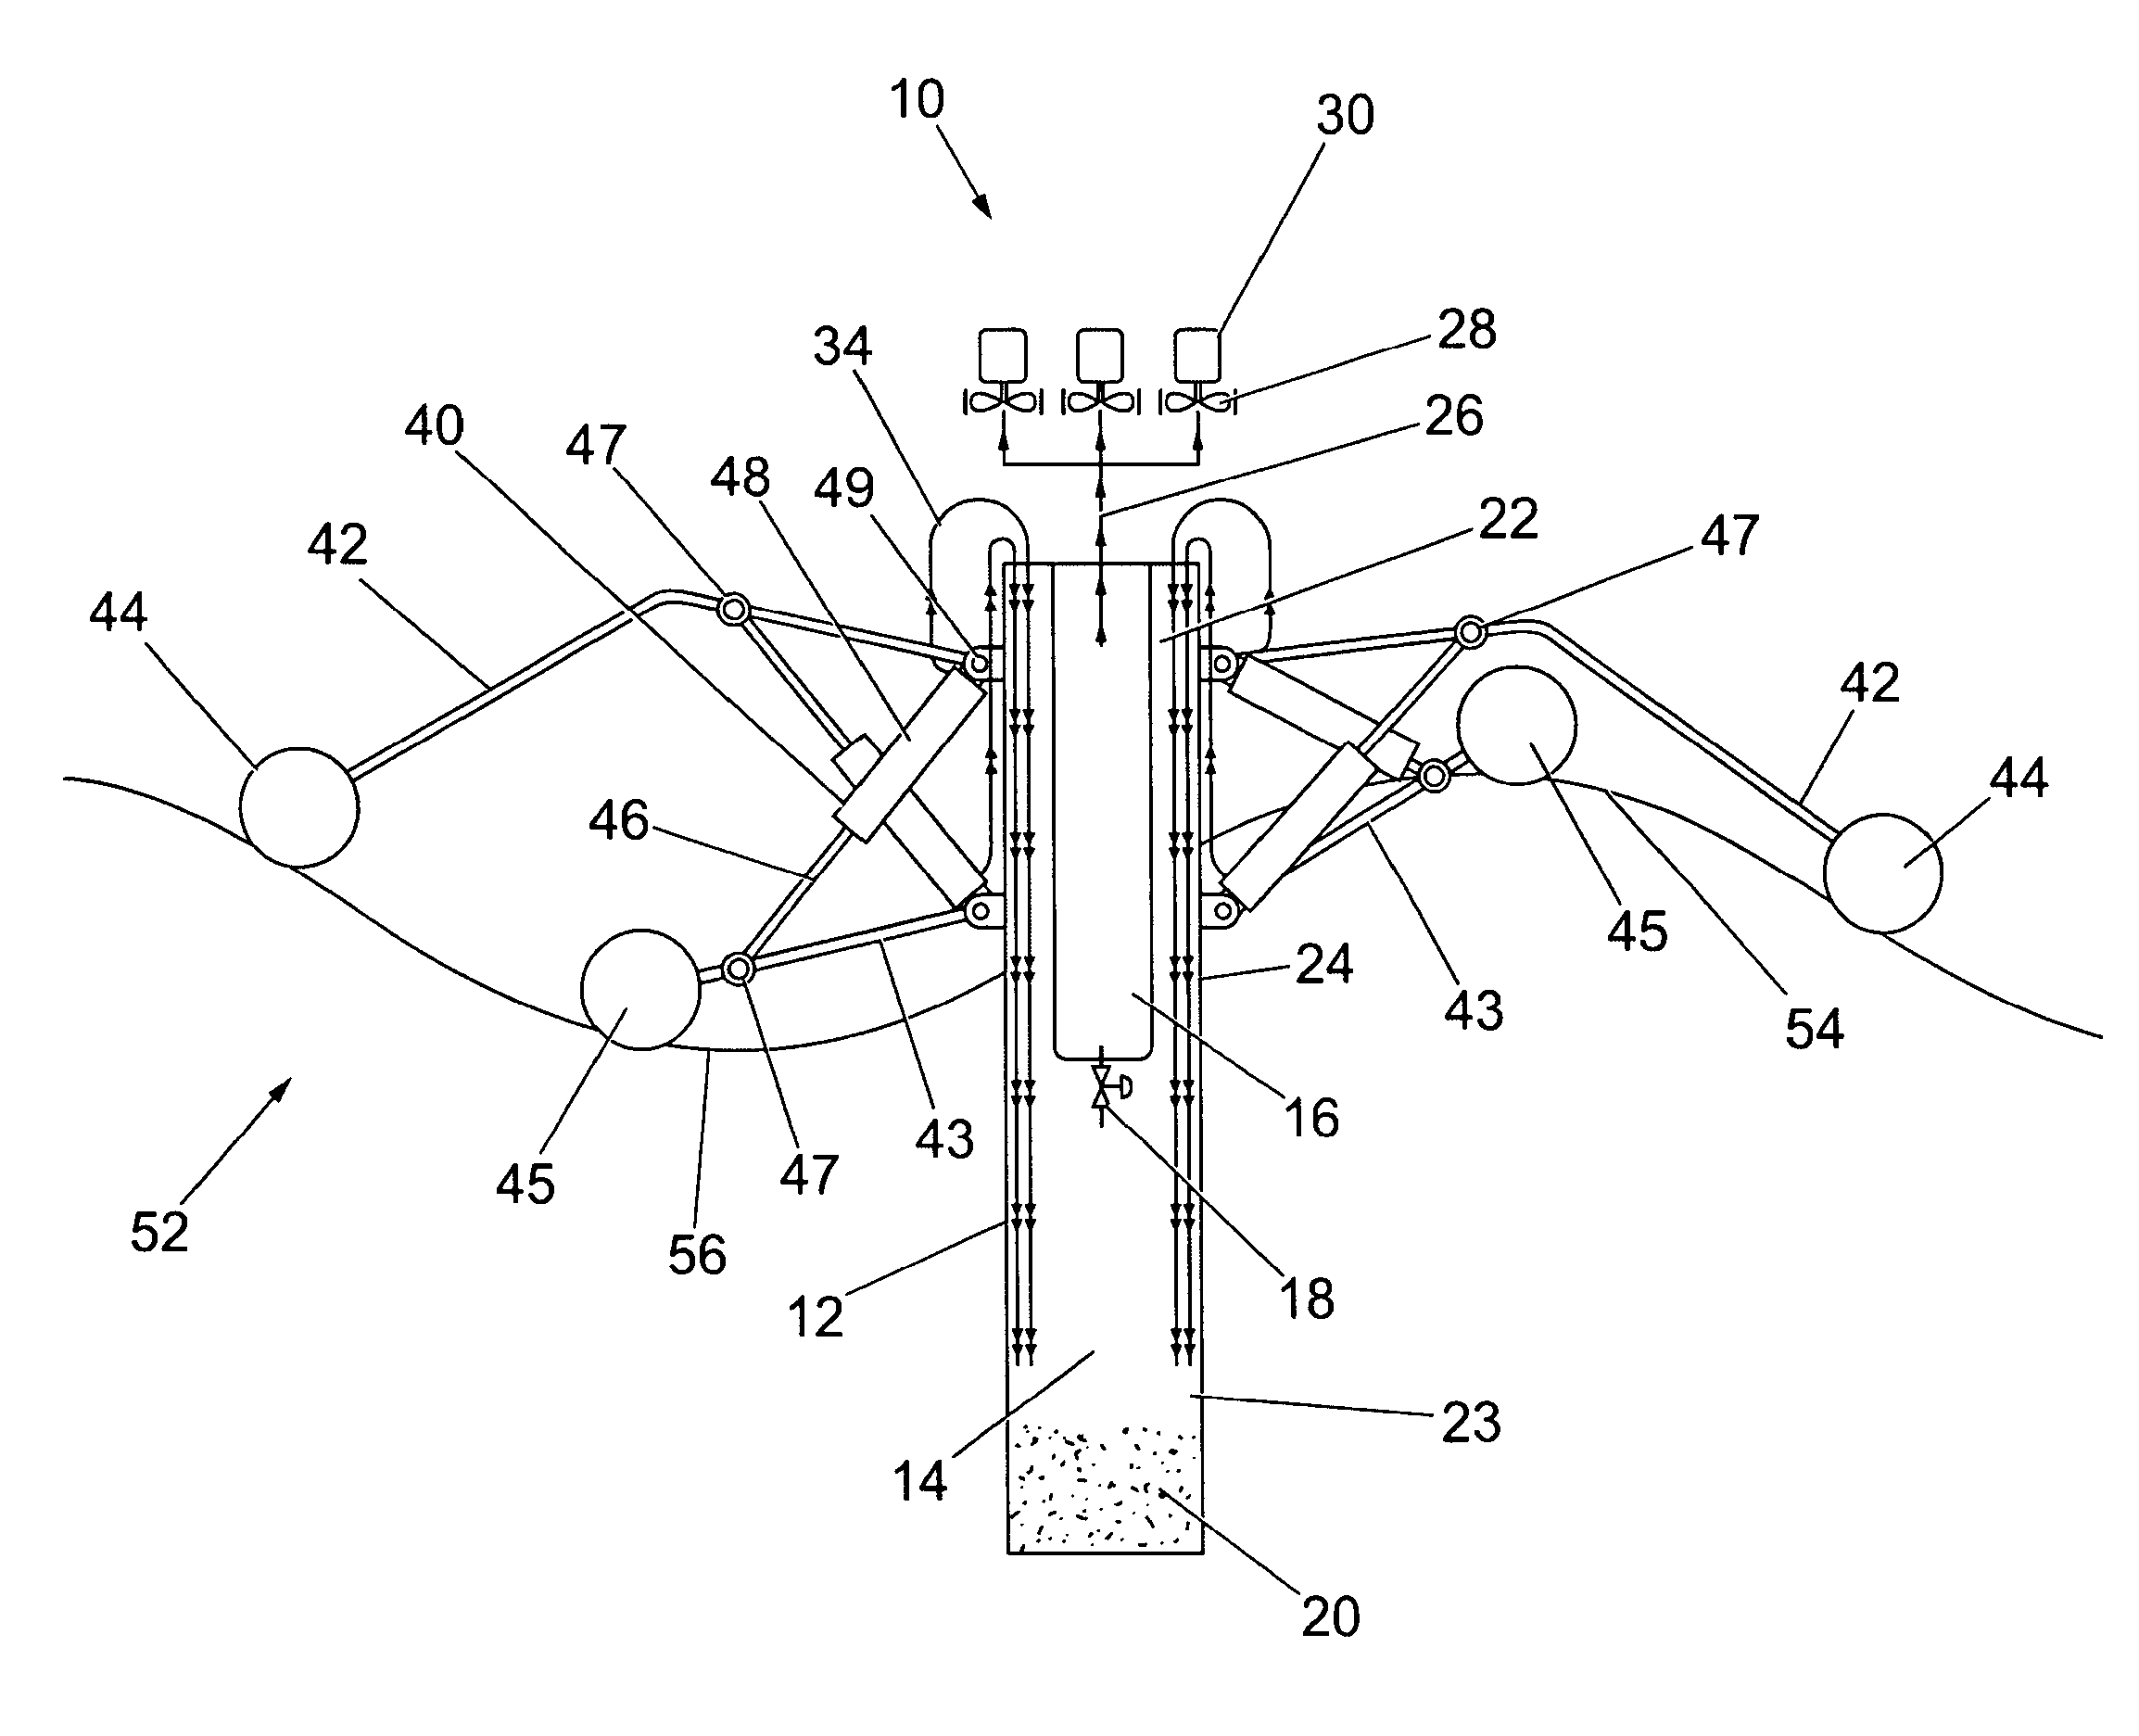 Method and apparatus for energy generation from wave motion